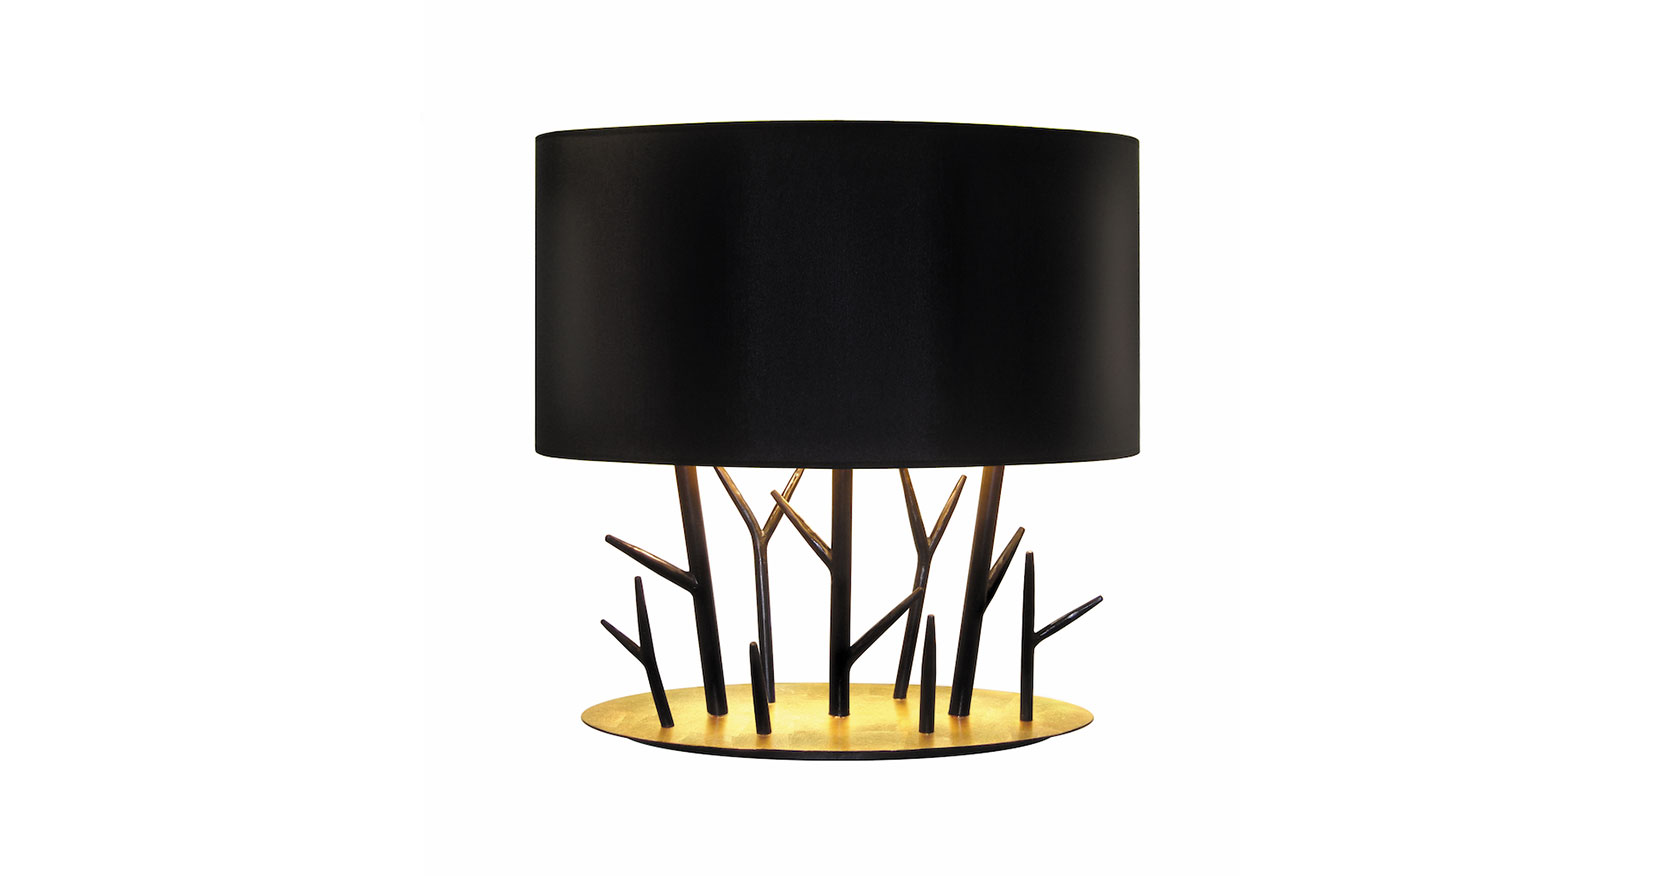 Eric Robin sculpted iron lamp. Gold leaf gilded base with many black patinated iron braches, the central stem supports lampshade with a shiny gold interior and black exterior.